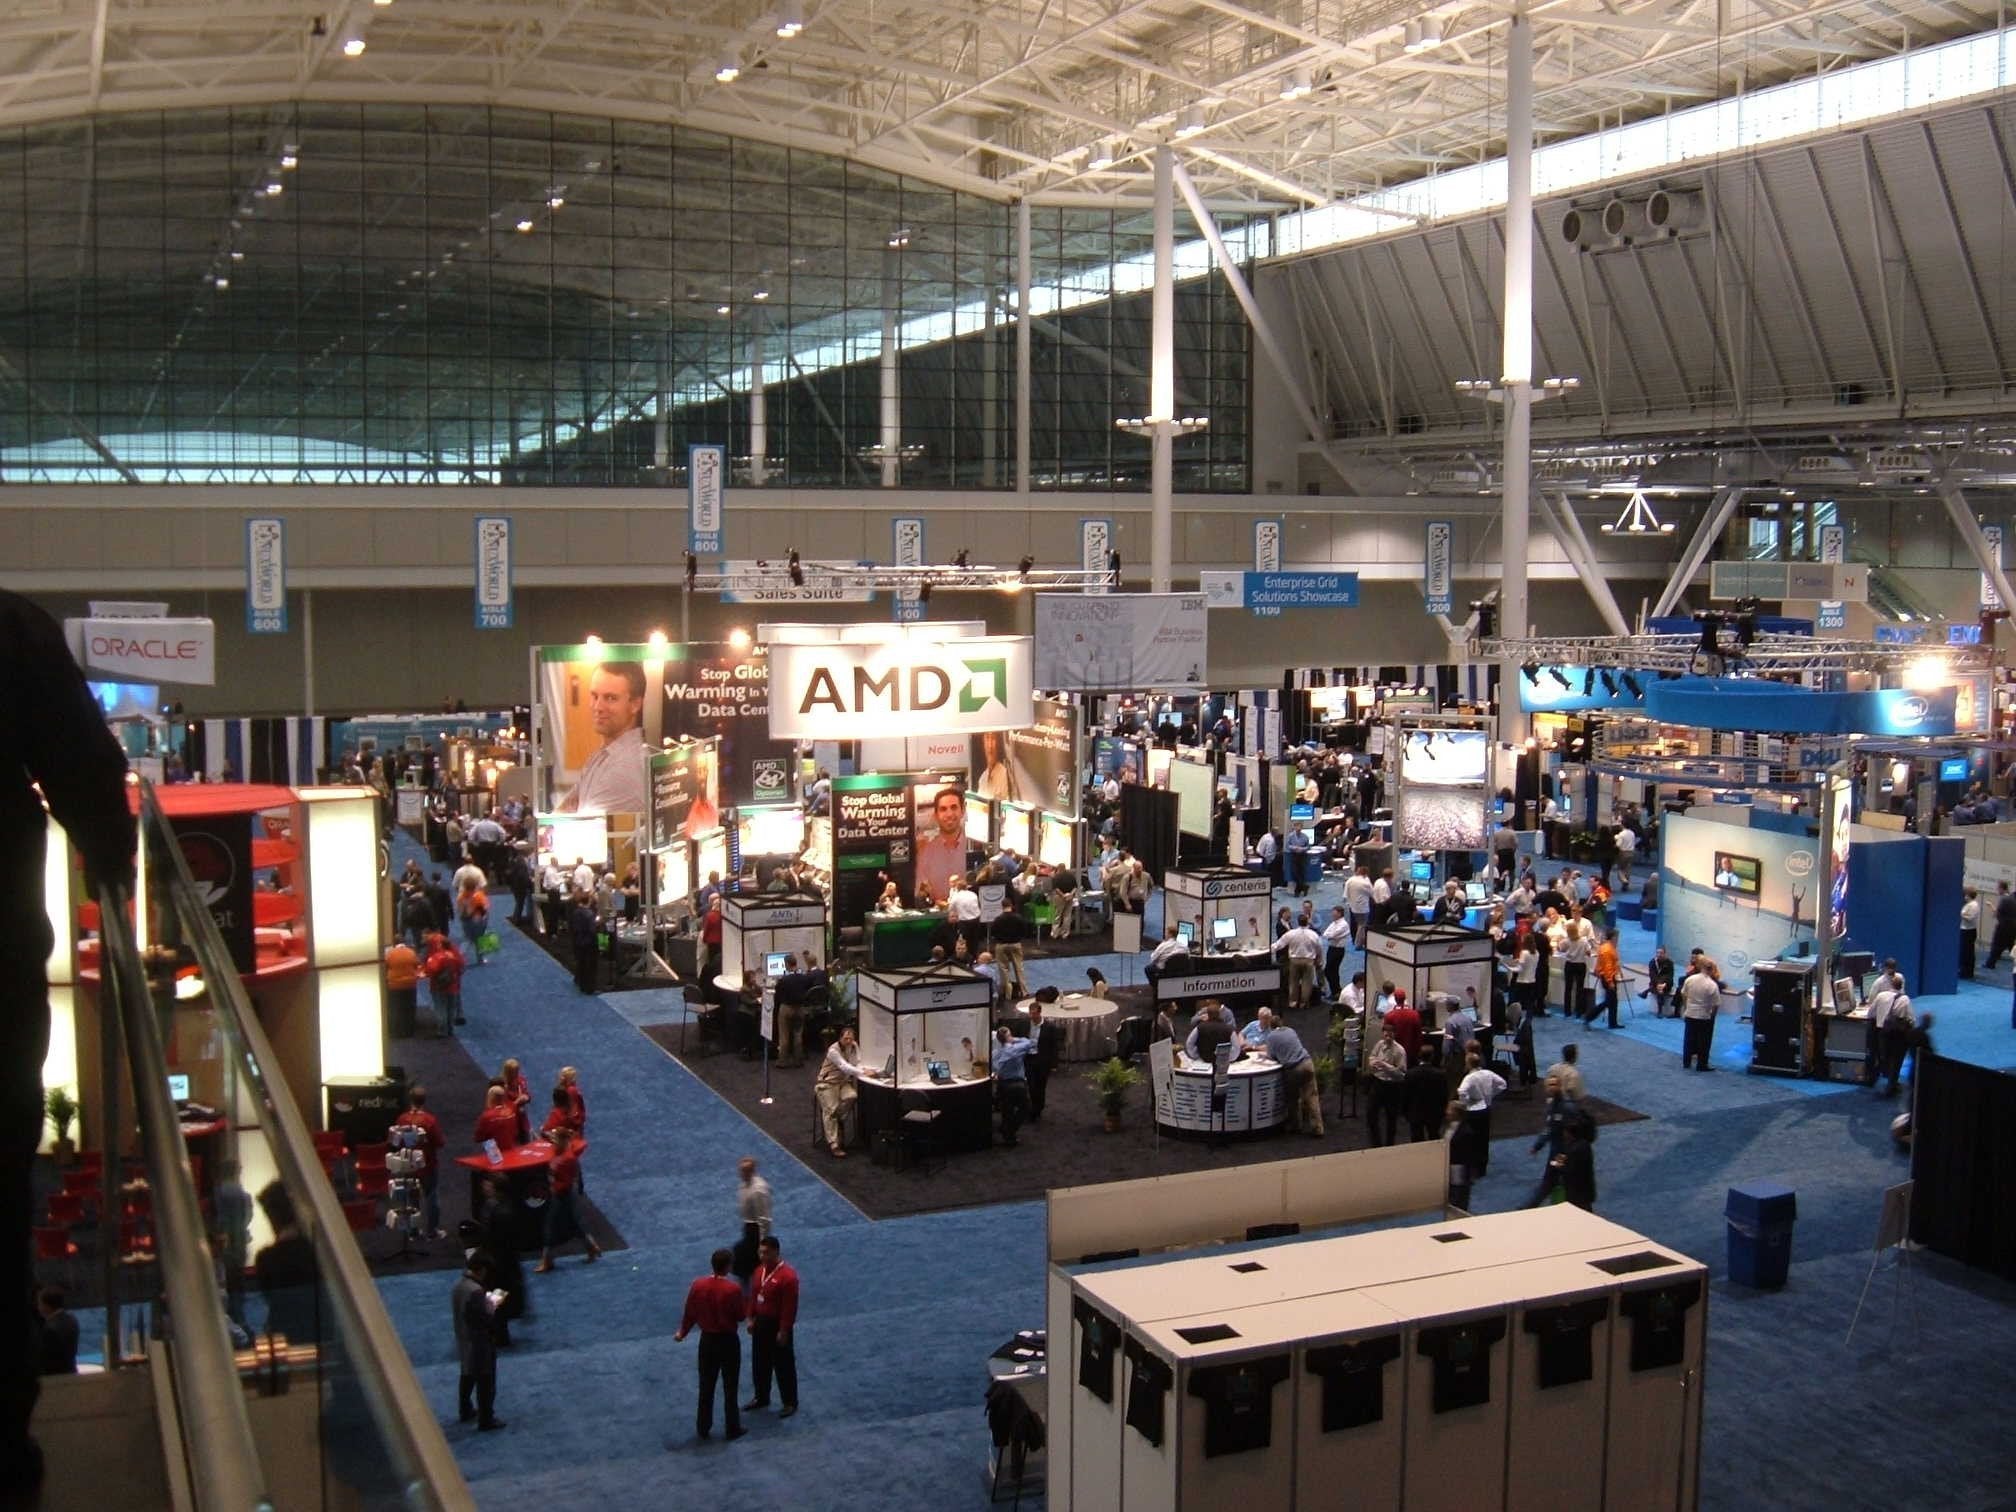 Trade Show Tips: What Can Exhibitors Do to Increase ROI?